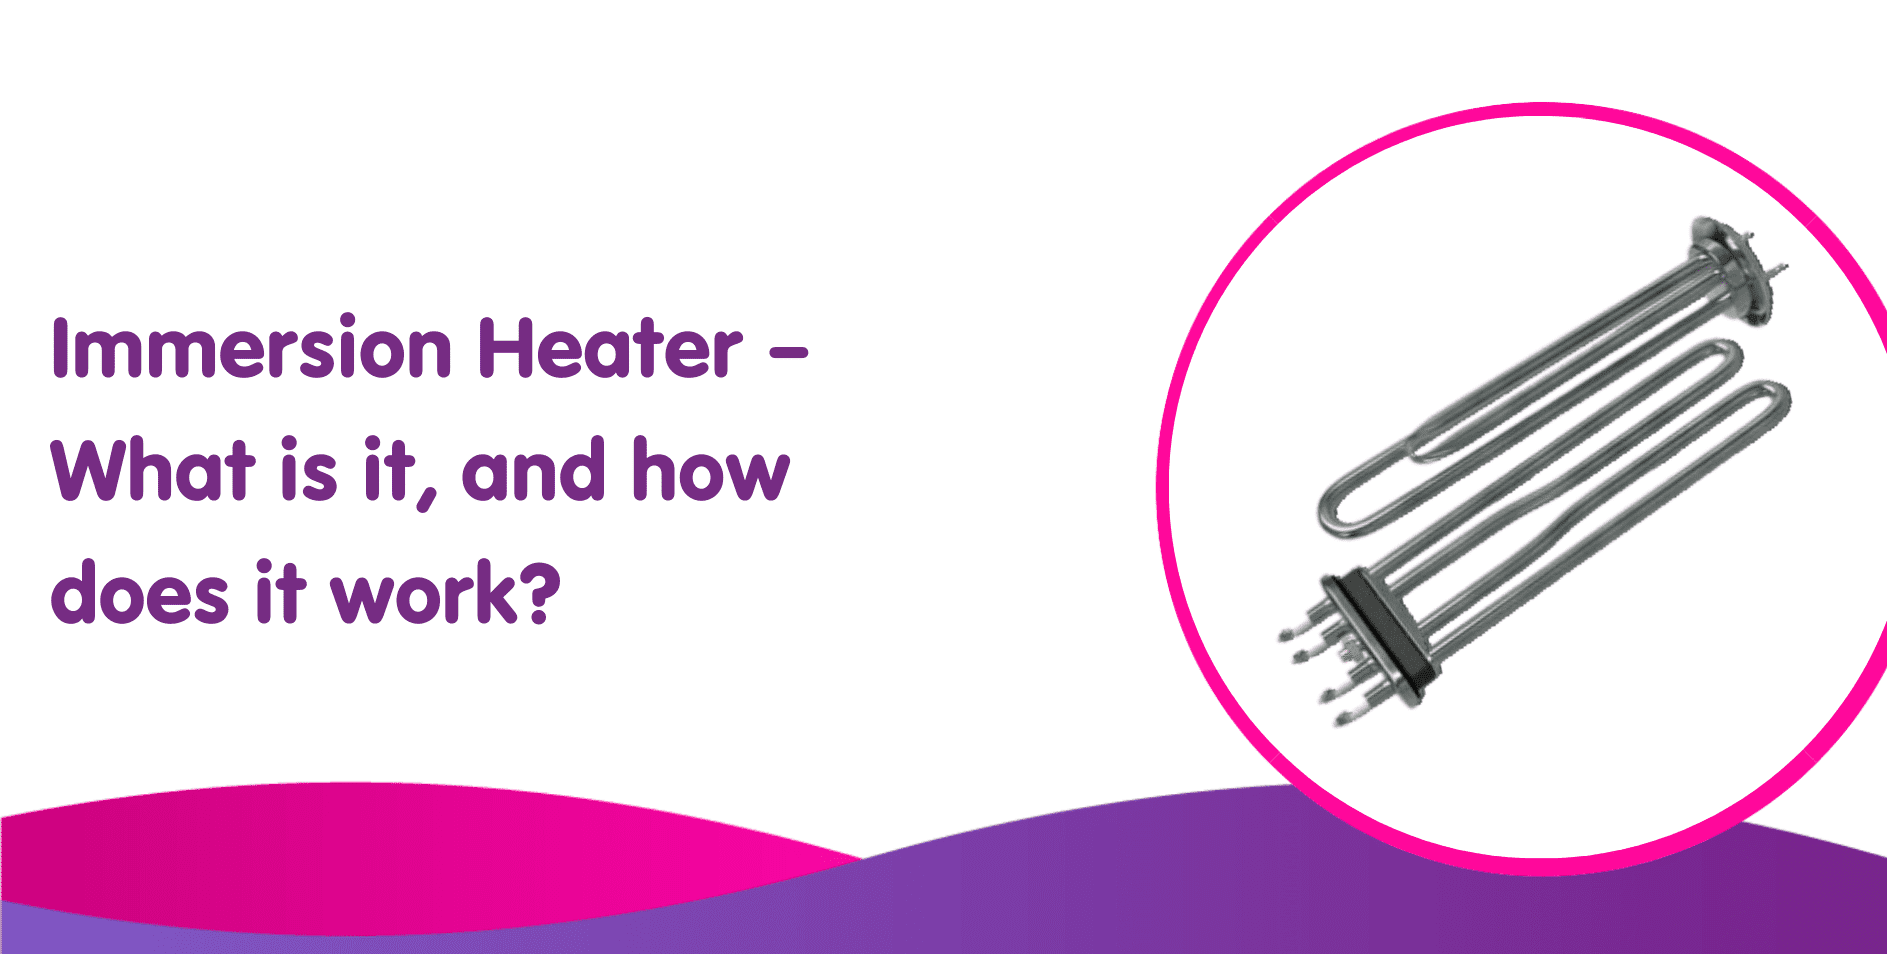 Immersion Heater – What is it, and how does it work